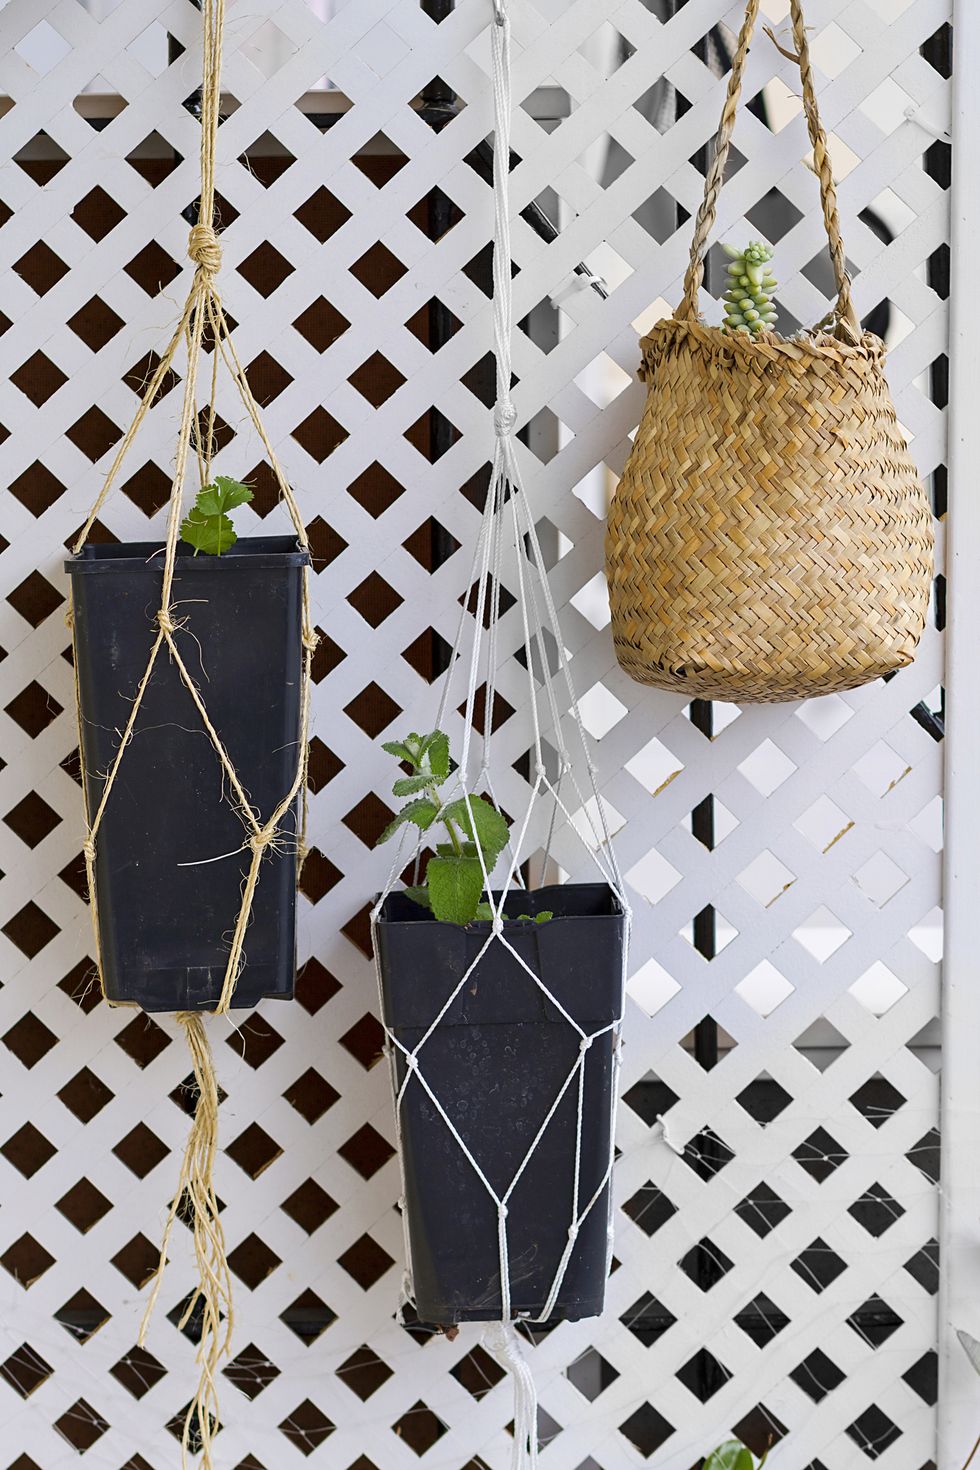 Vertical garden ideas recycled planters